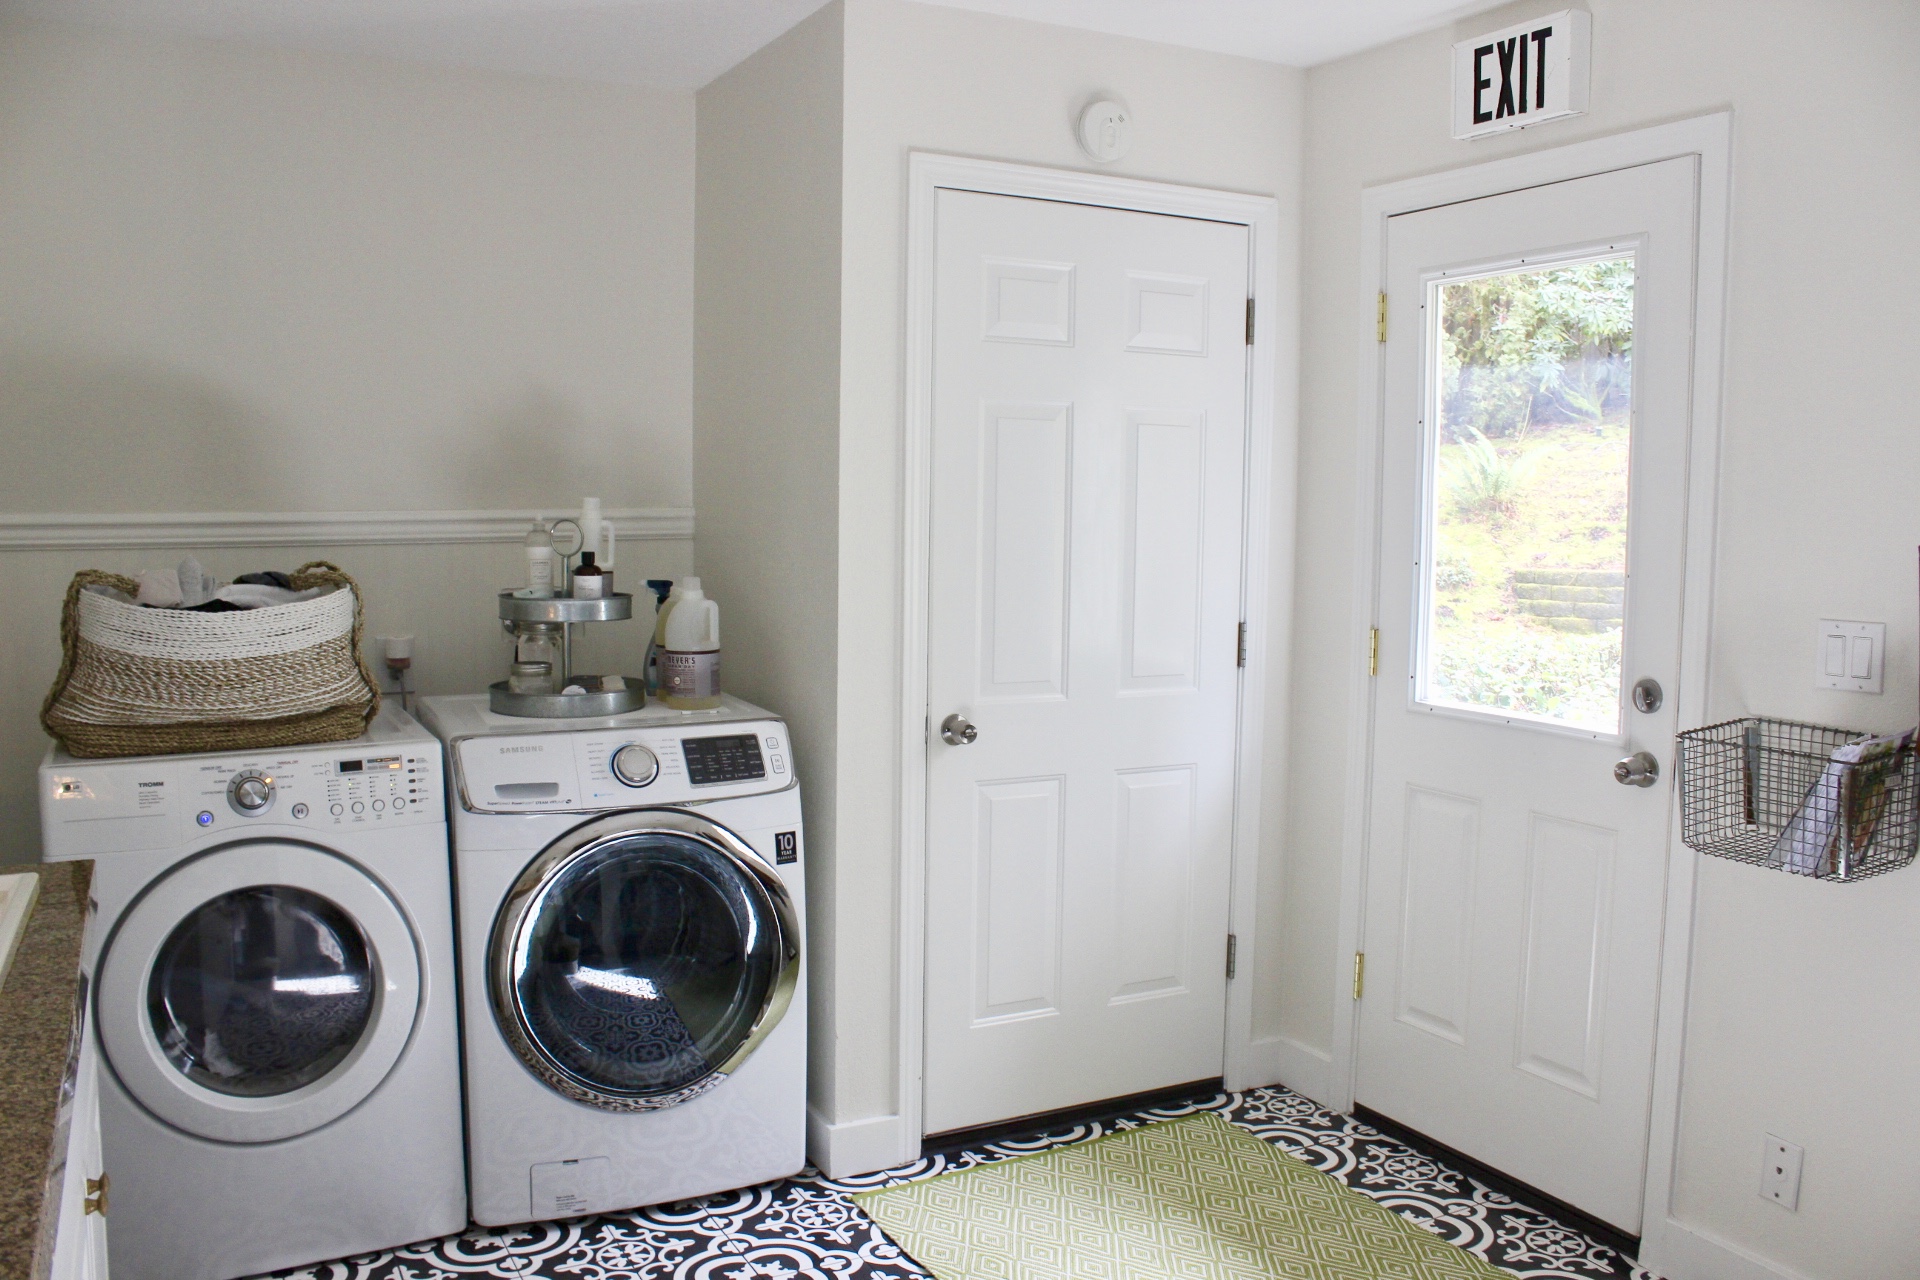 Laundry Rooms are Important Too